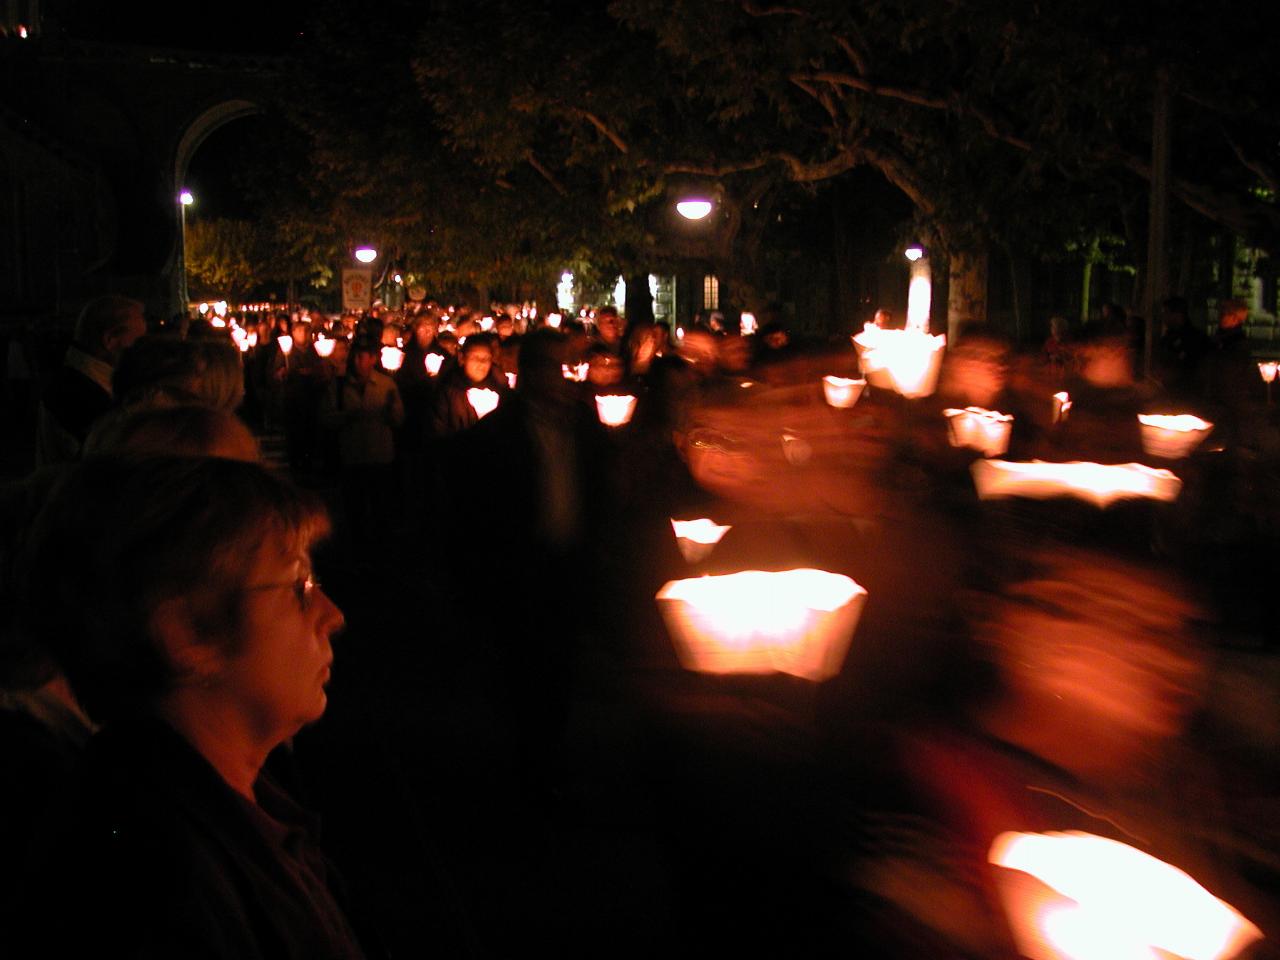 Torchlight procession at Lourdes